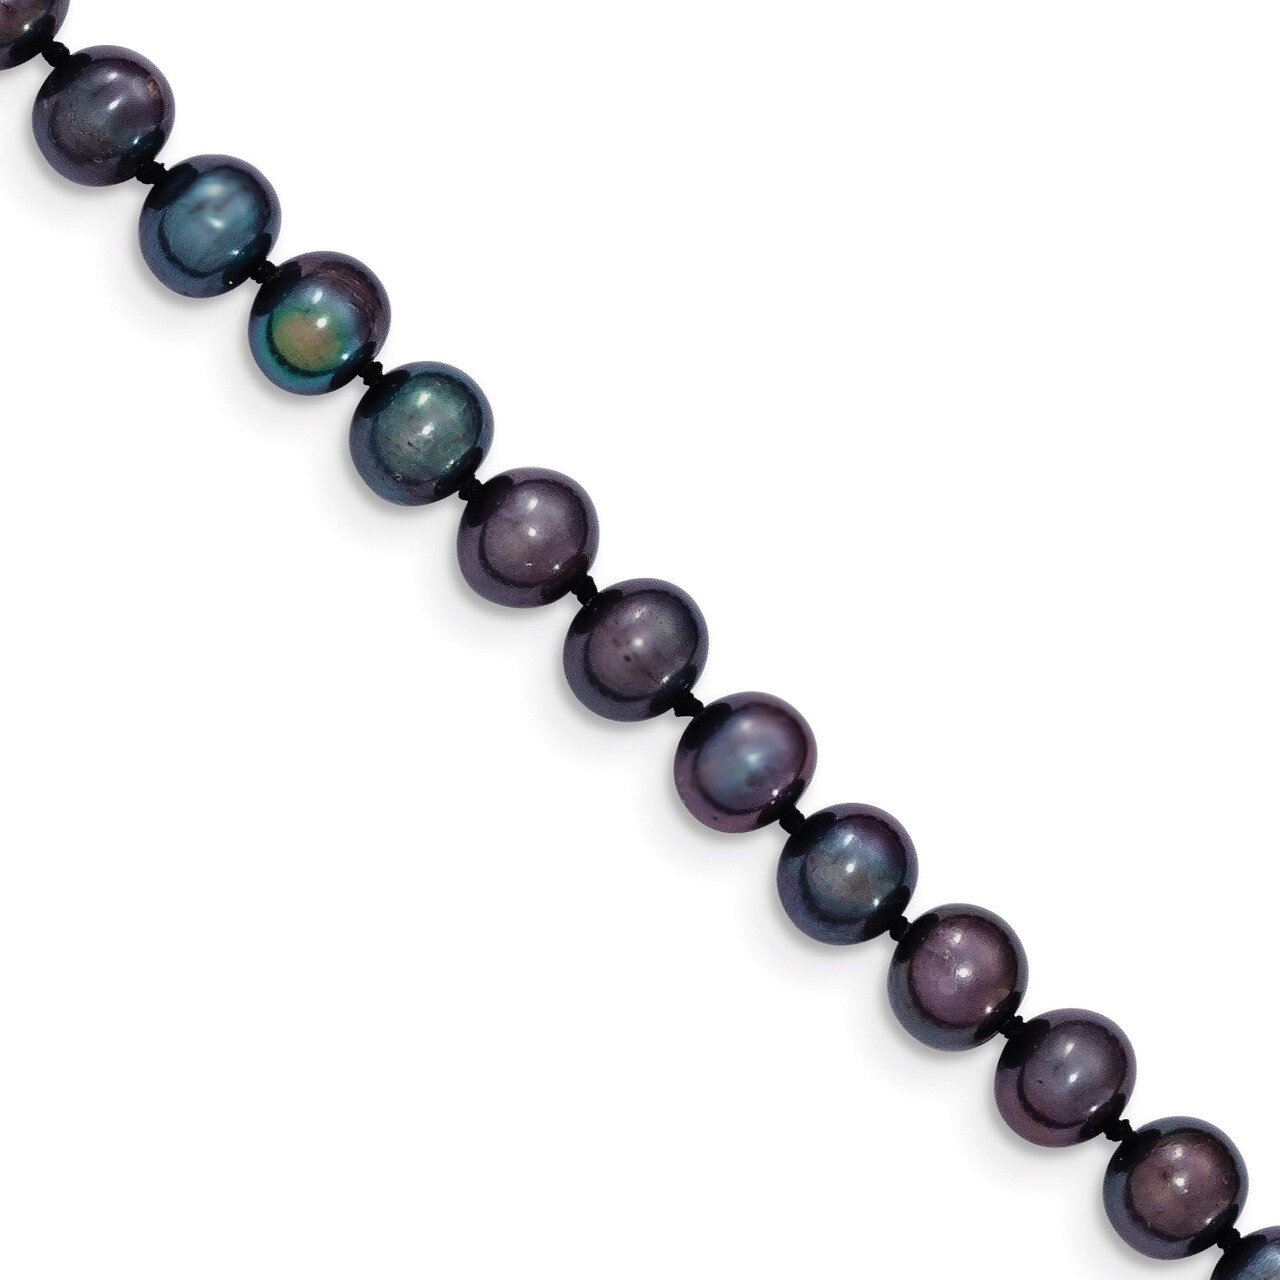 6-7mm Black Cultured Near Round Pearl Necklace 24 Inch 14k Gold BPN060-24